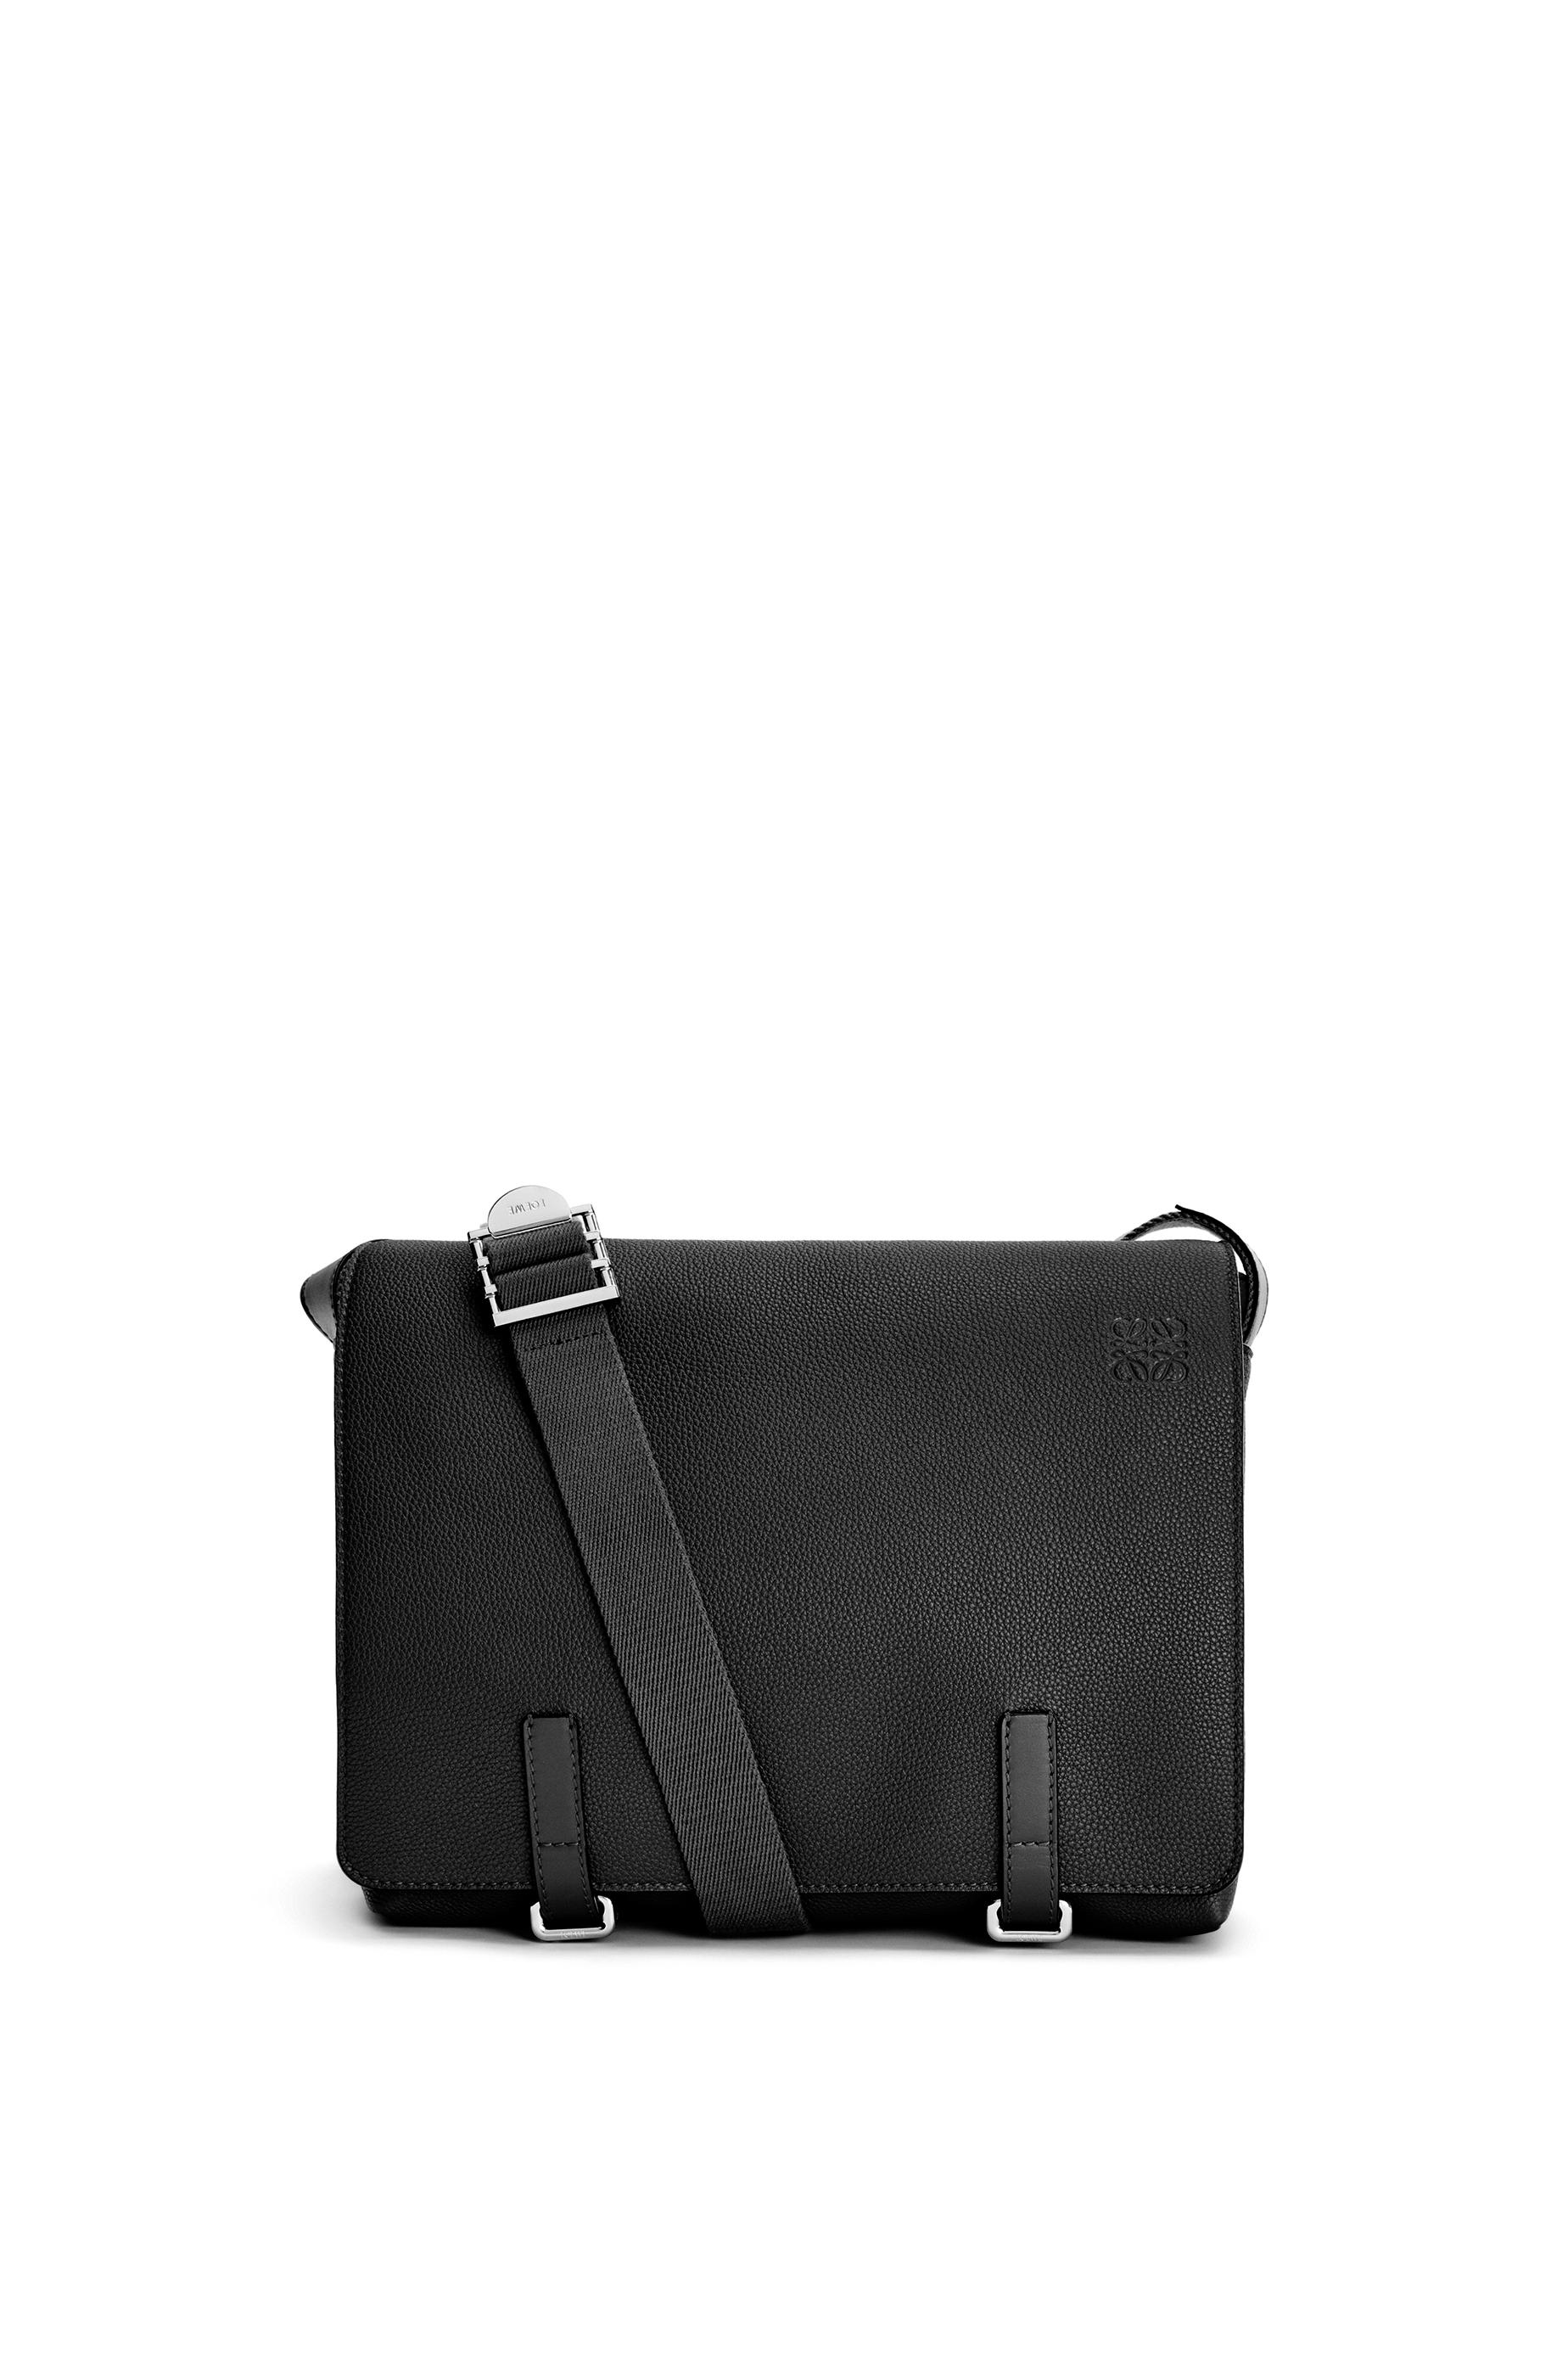 Military Messenger bag in soft grained calfskin by LOEWE